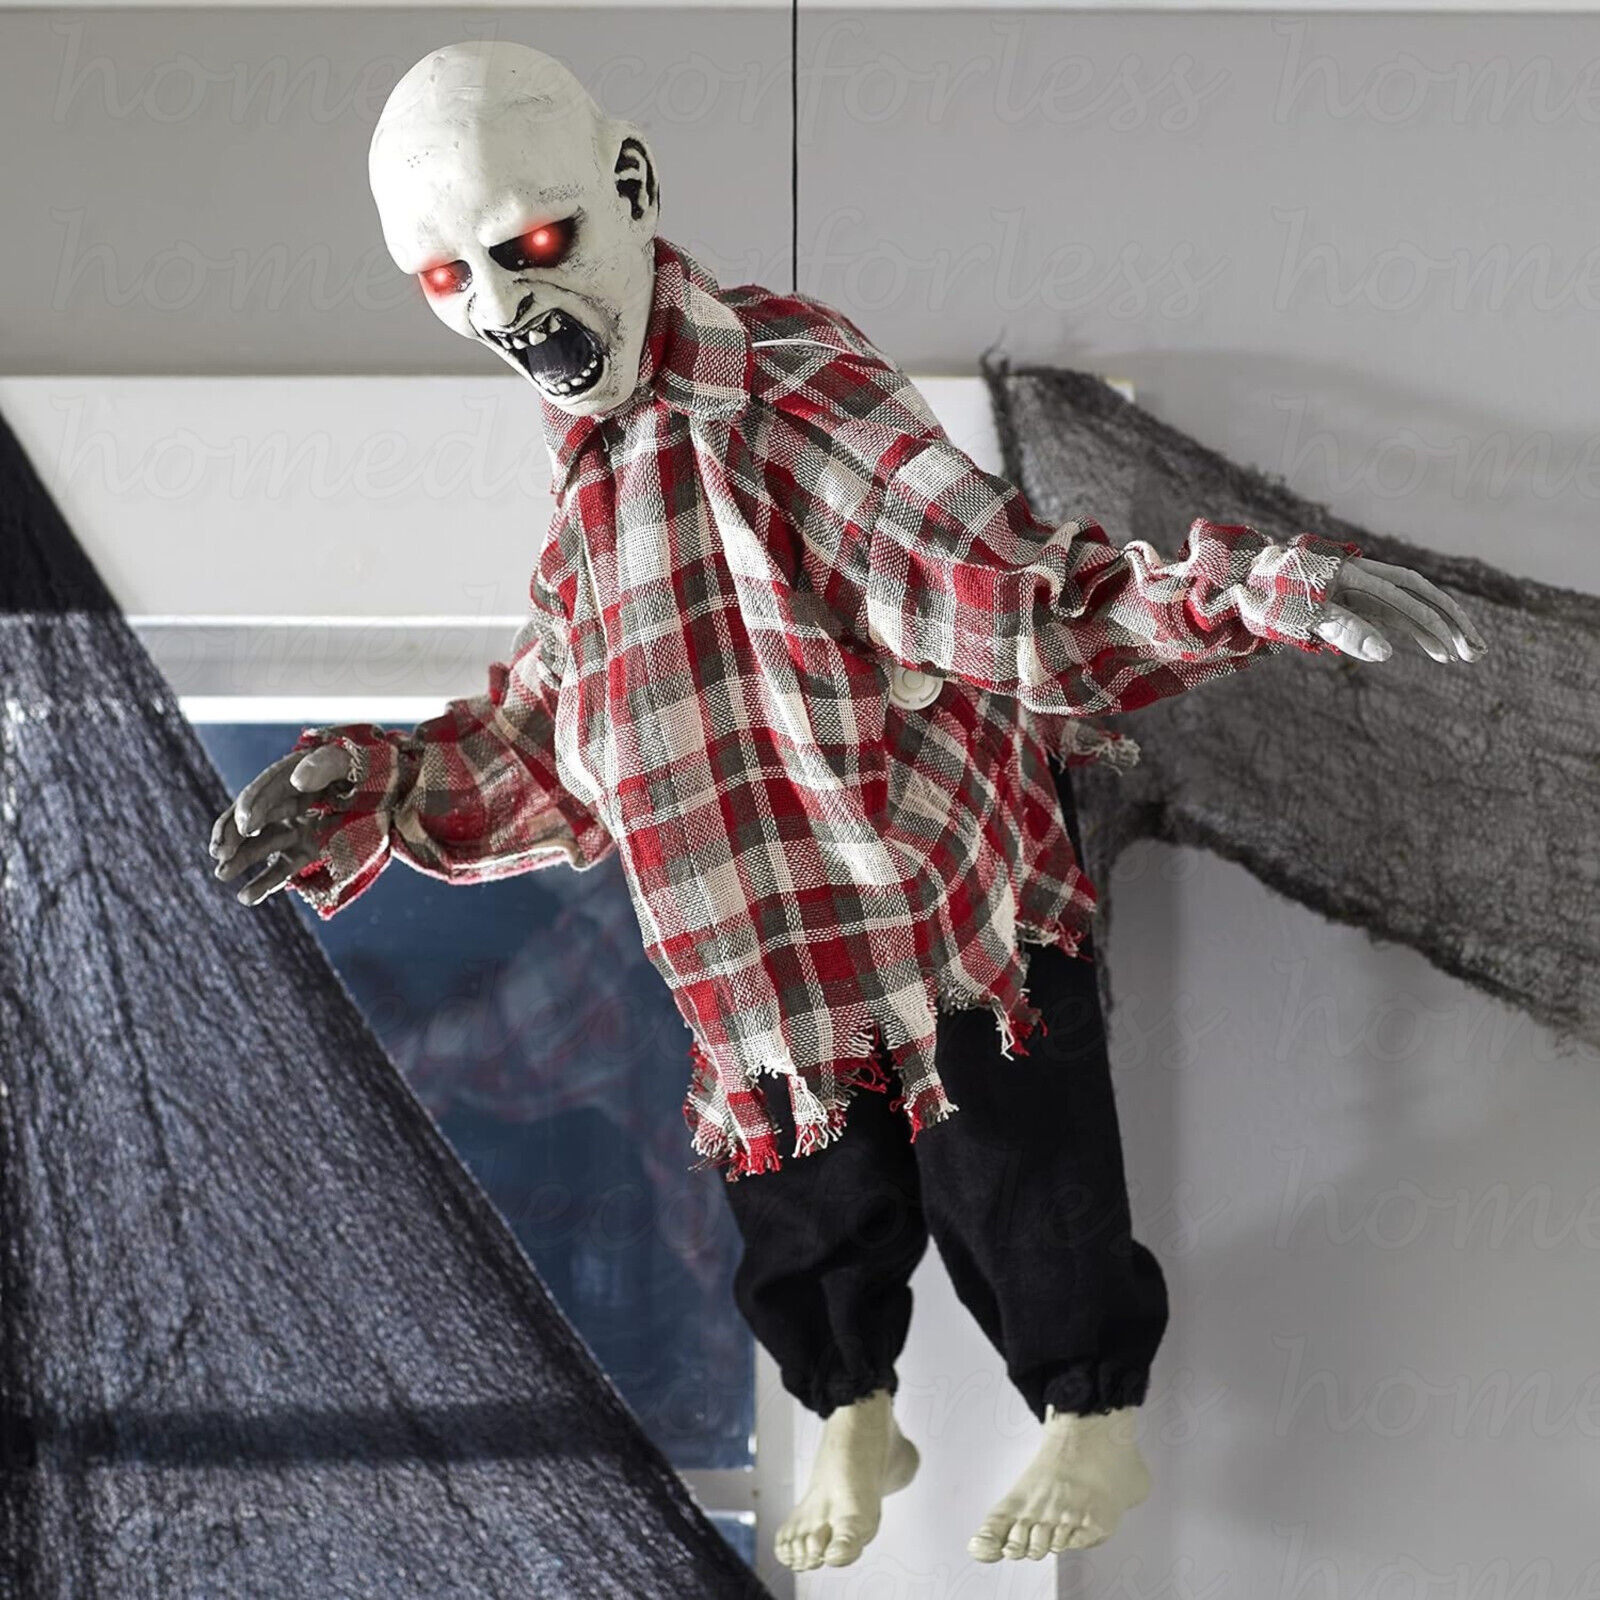 Animated Hanging Floating Zombie Scary Sounds Halloween Haunted House Prop Decor